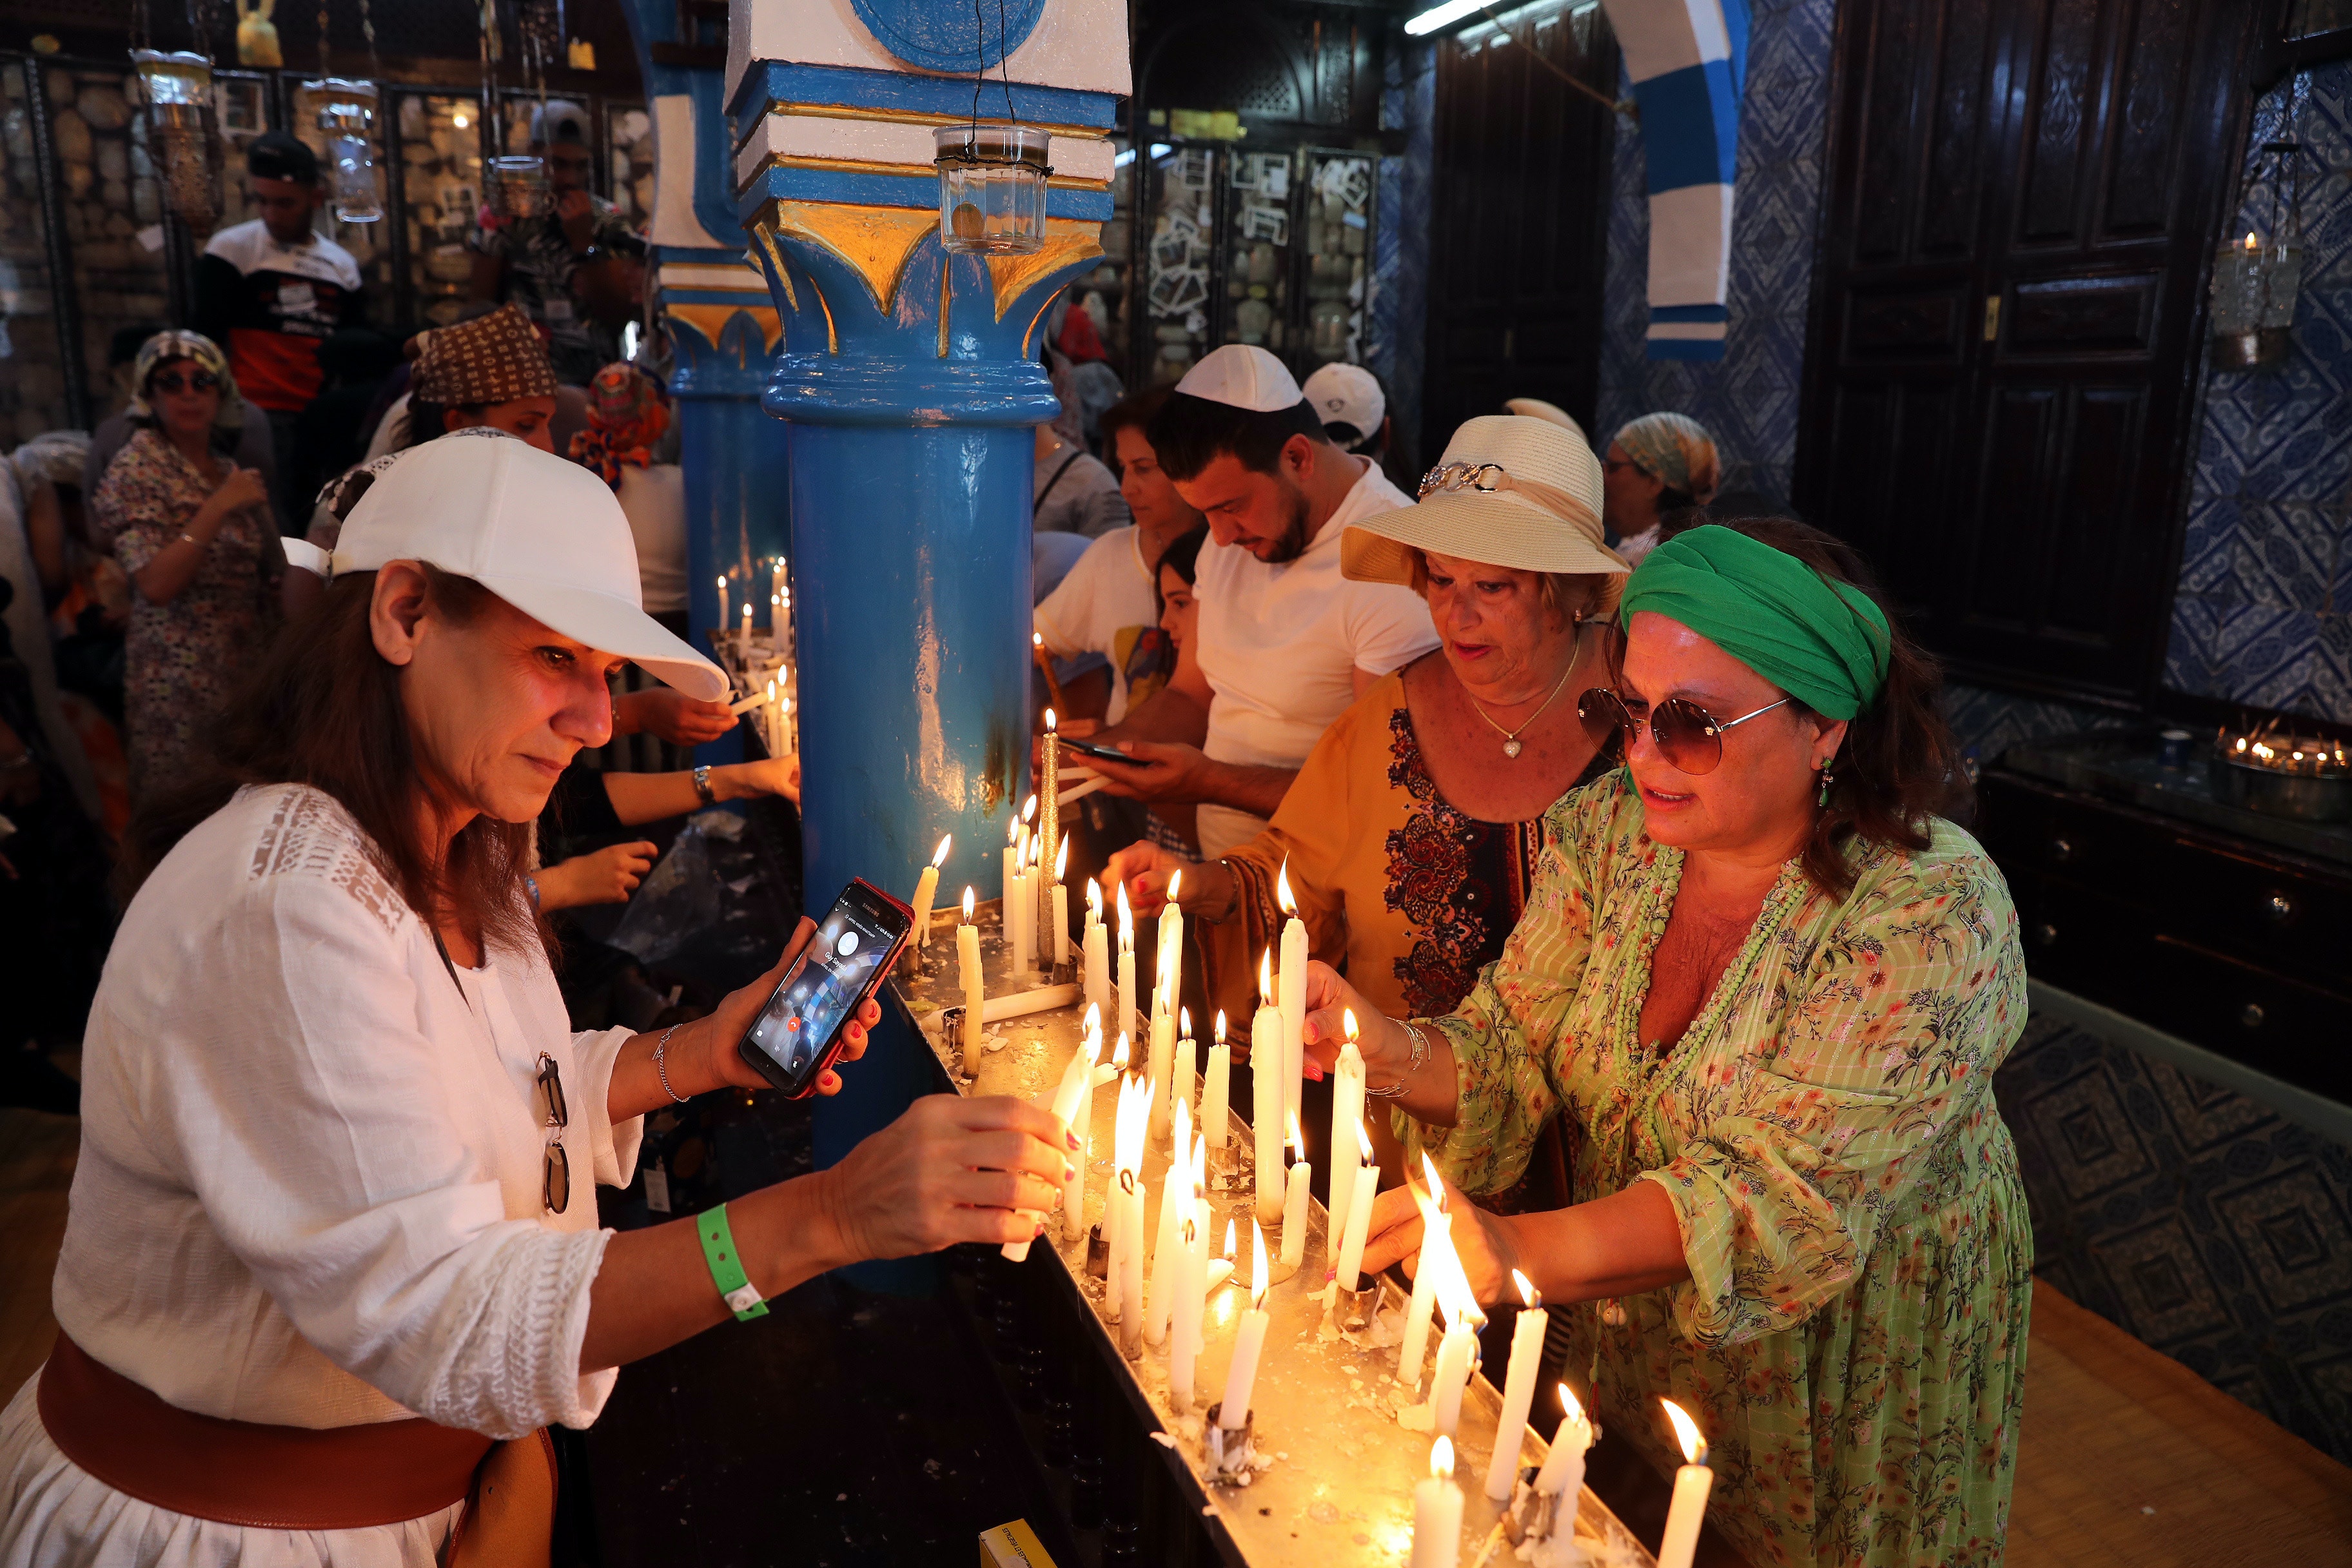 How Tunisia is trying to resurrect a Jewish pilgrimage to the island of Djerba